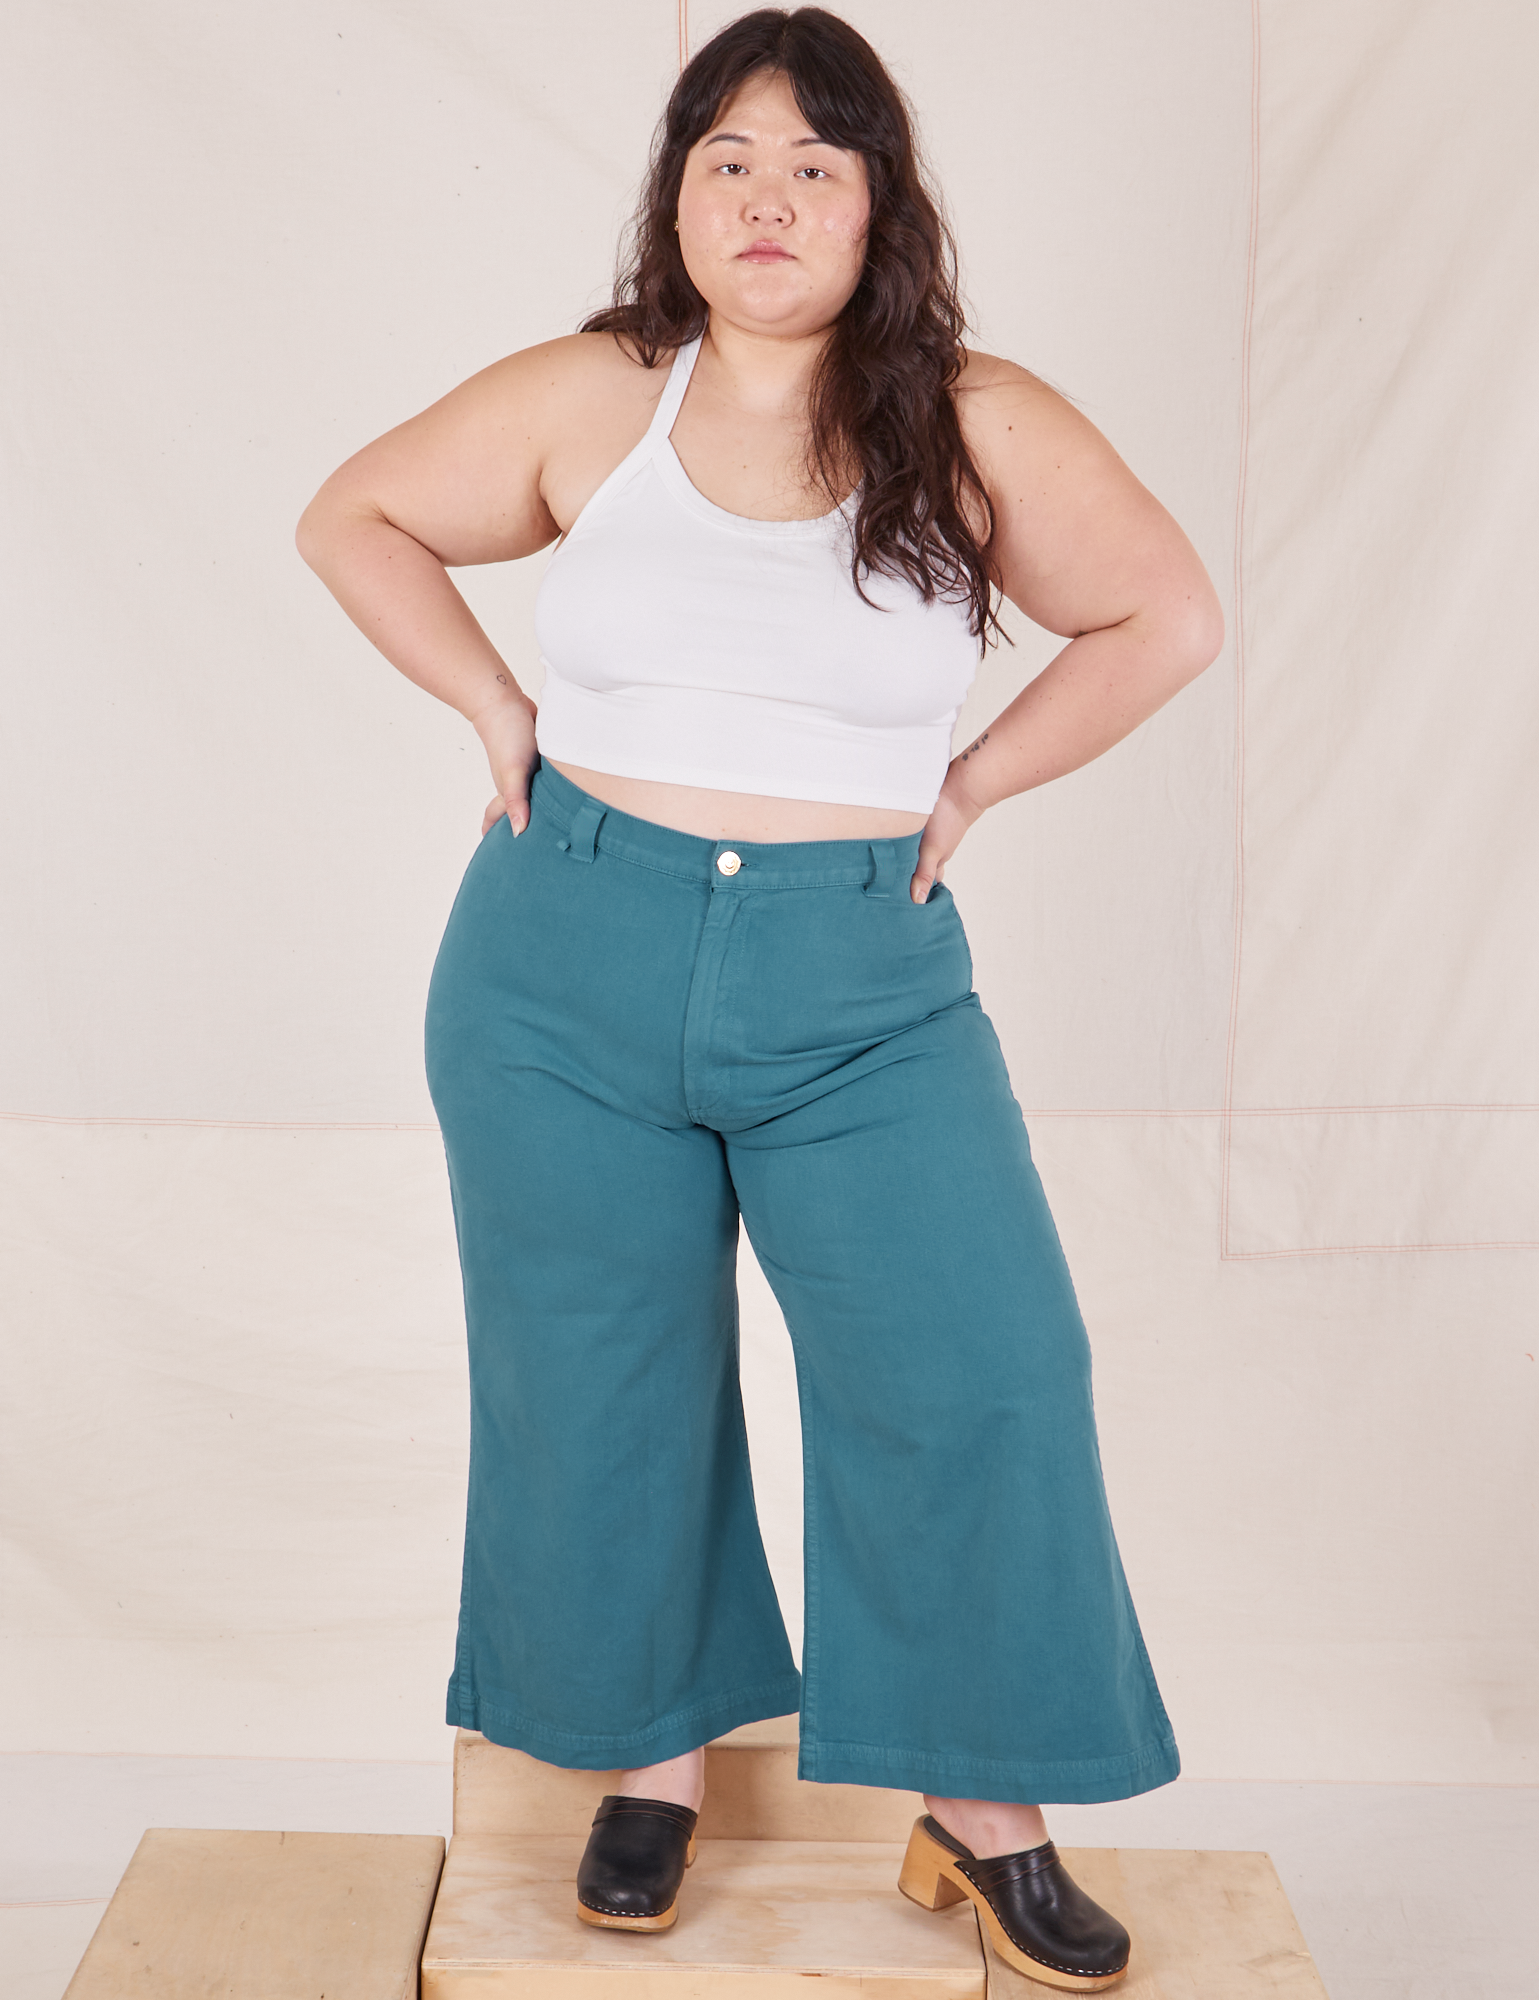 Ashley is 5&#39;7&quot; and wearing 1XL Petite Bell Bottoms in Marine Blue paired with vintage off-white Halter Top